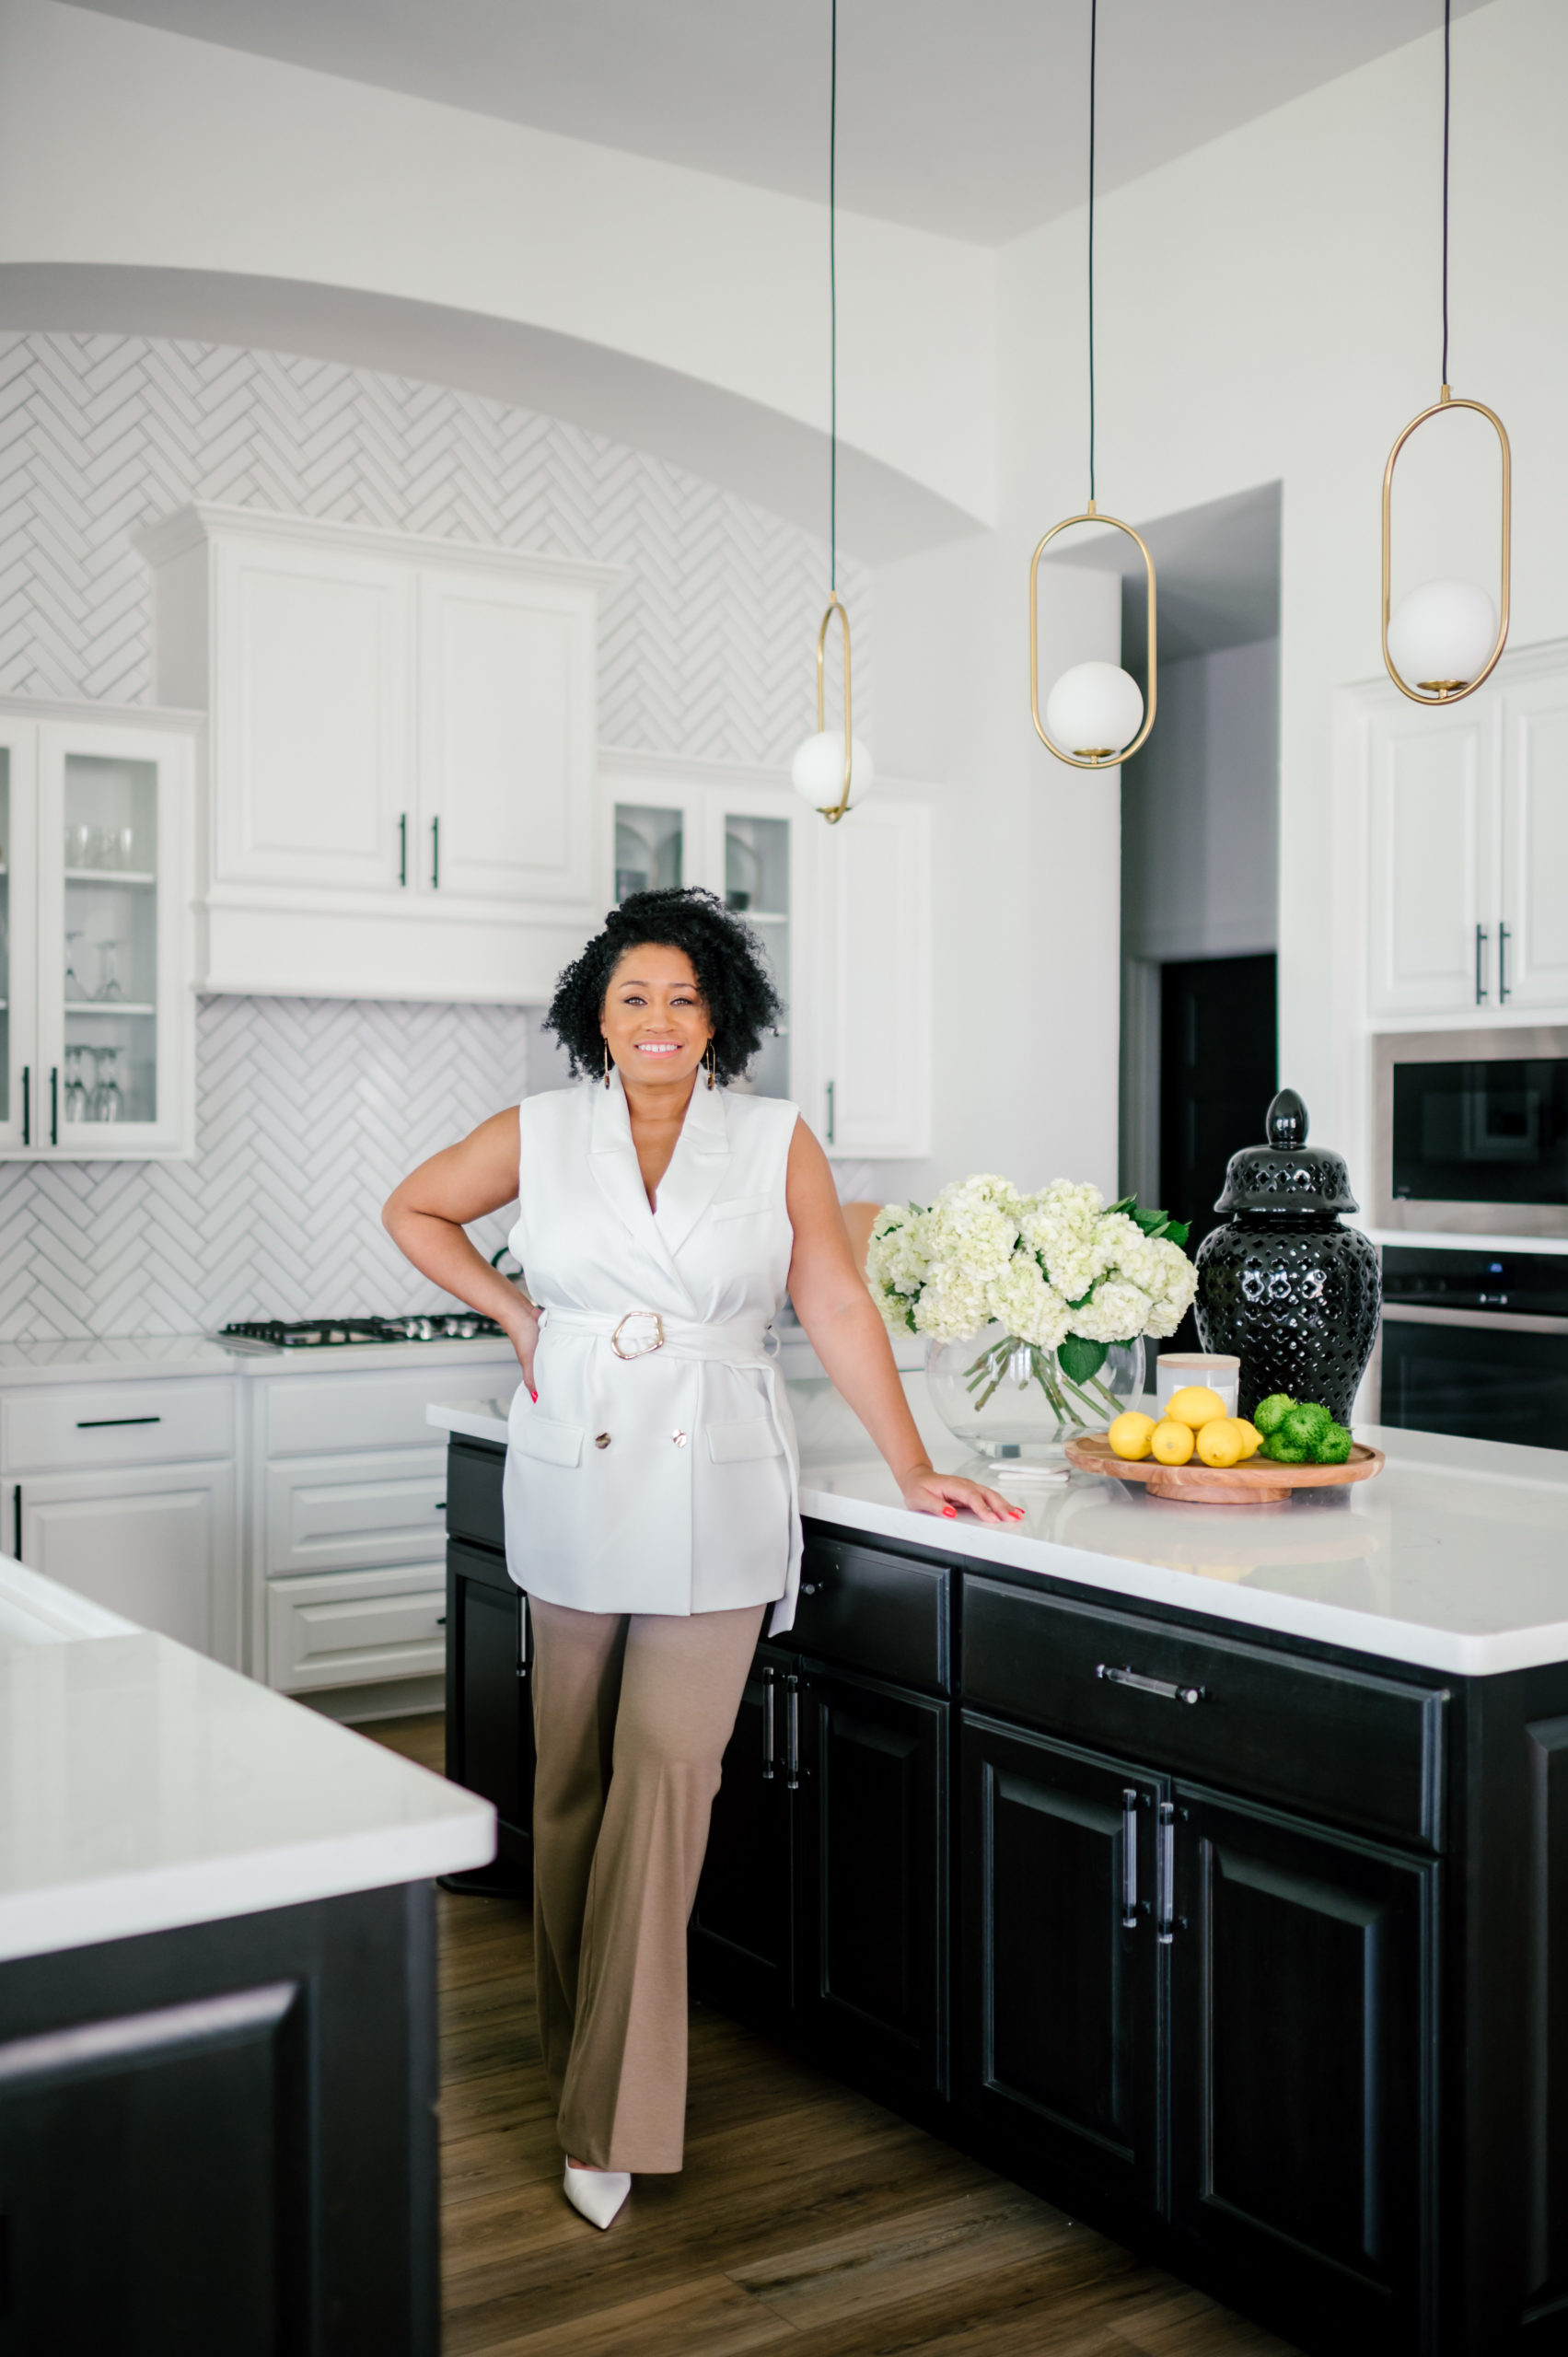 Professional interior photography of interior designer standing in a white blouse and khaki pants leaning on marble kitchen counter smiling